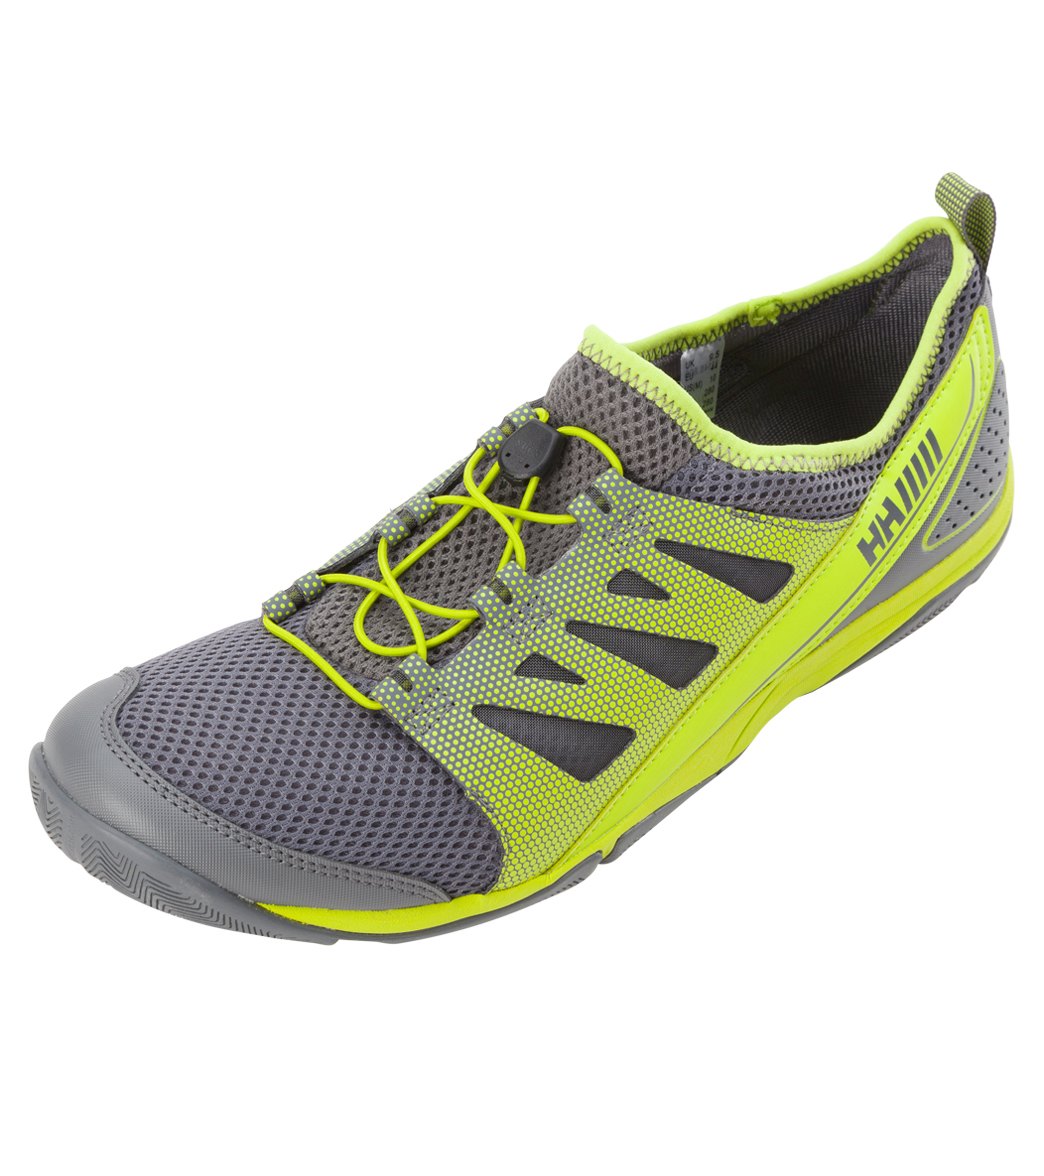 Helly Hansen Men's Aquapace 2 Water Shoes - Mid Grey/Charcoal/Lime 7 - Swimoutlet.com